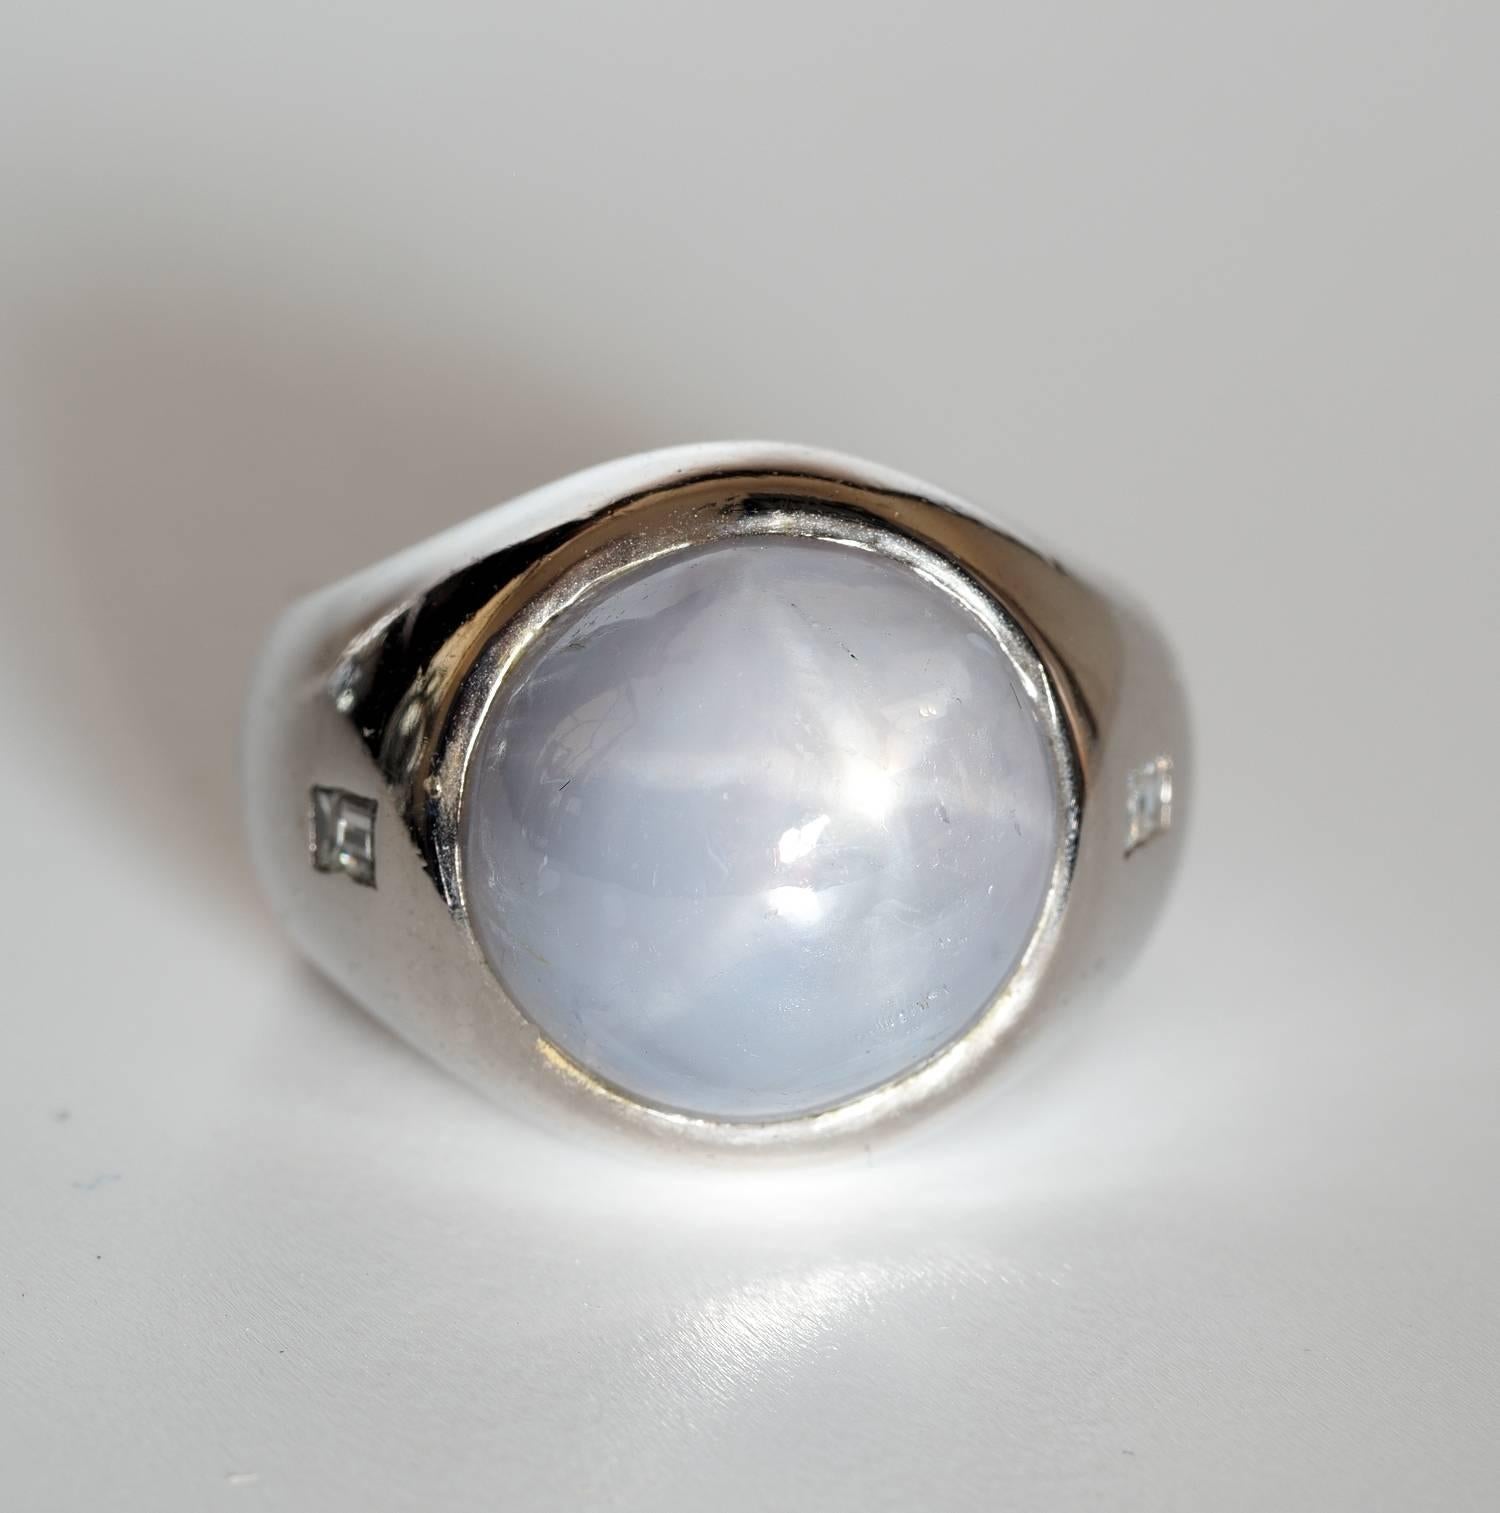 Fabulous design, massively constructed od solid 18 KT white gold
Set with a large Natural no heat Star Sapphire of light grey with six pointed star phenomena
13.40 Ct estimate on mounting
Sleek elegant mount enriched with two little rectangular cut